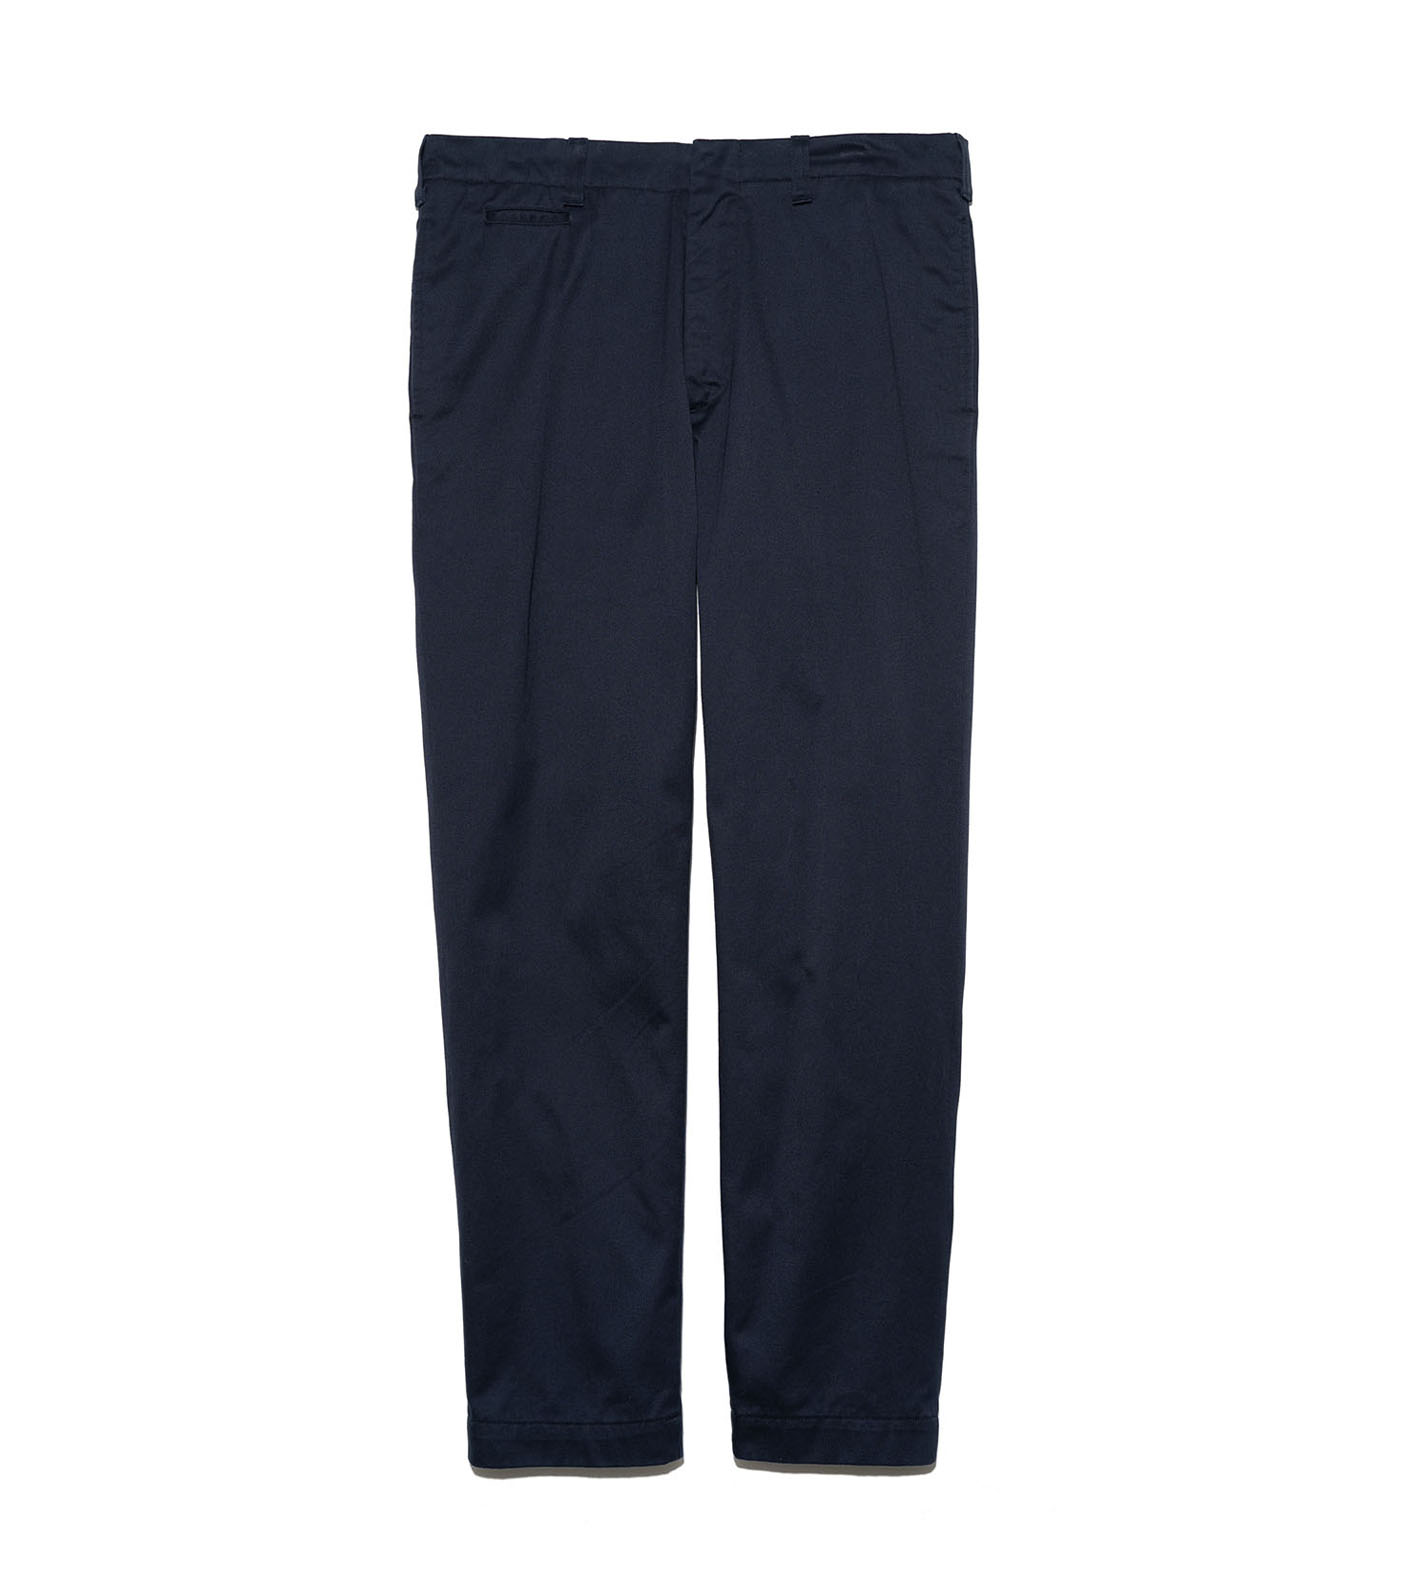 WY25PT002Wasted Youth CHINO PANTS NAVY Mサイズ